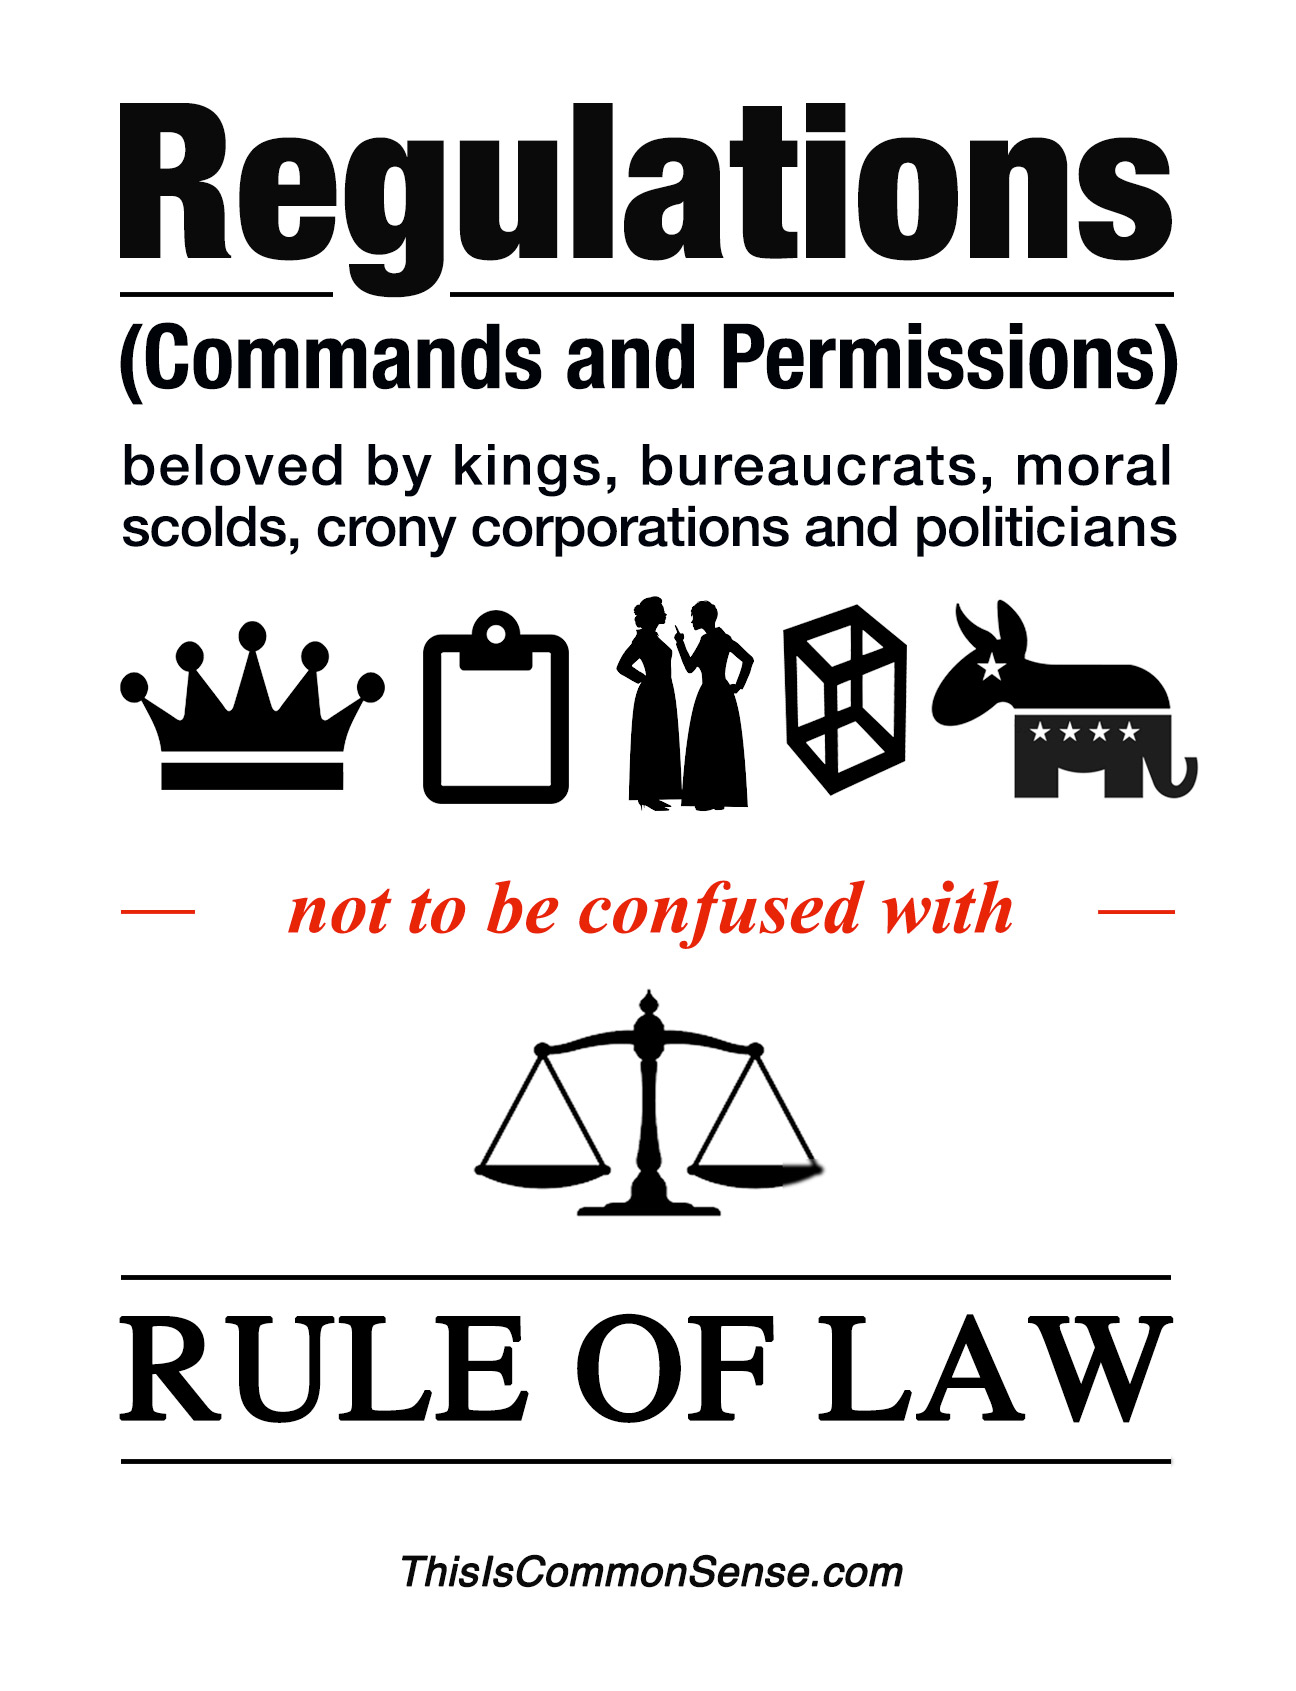 regulations, rule of law, control, freedom